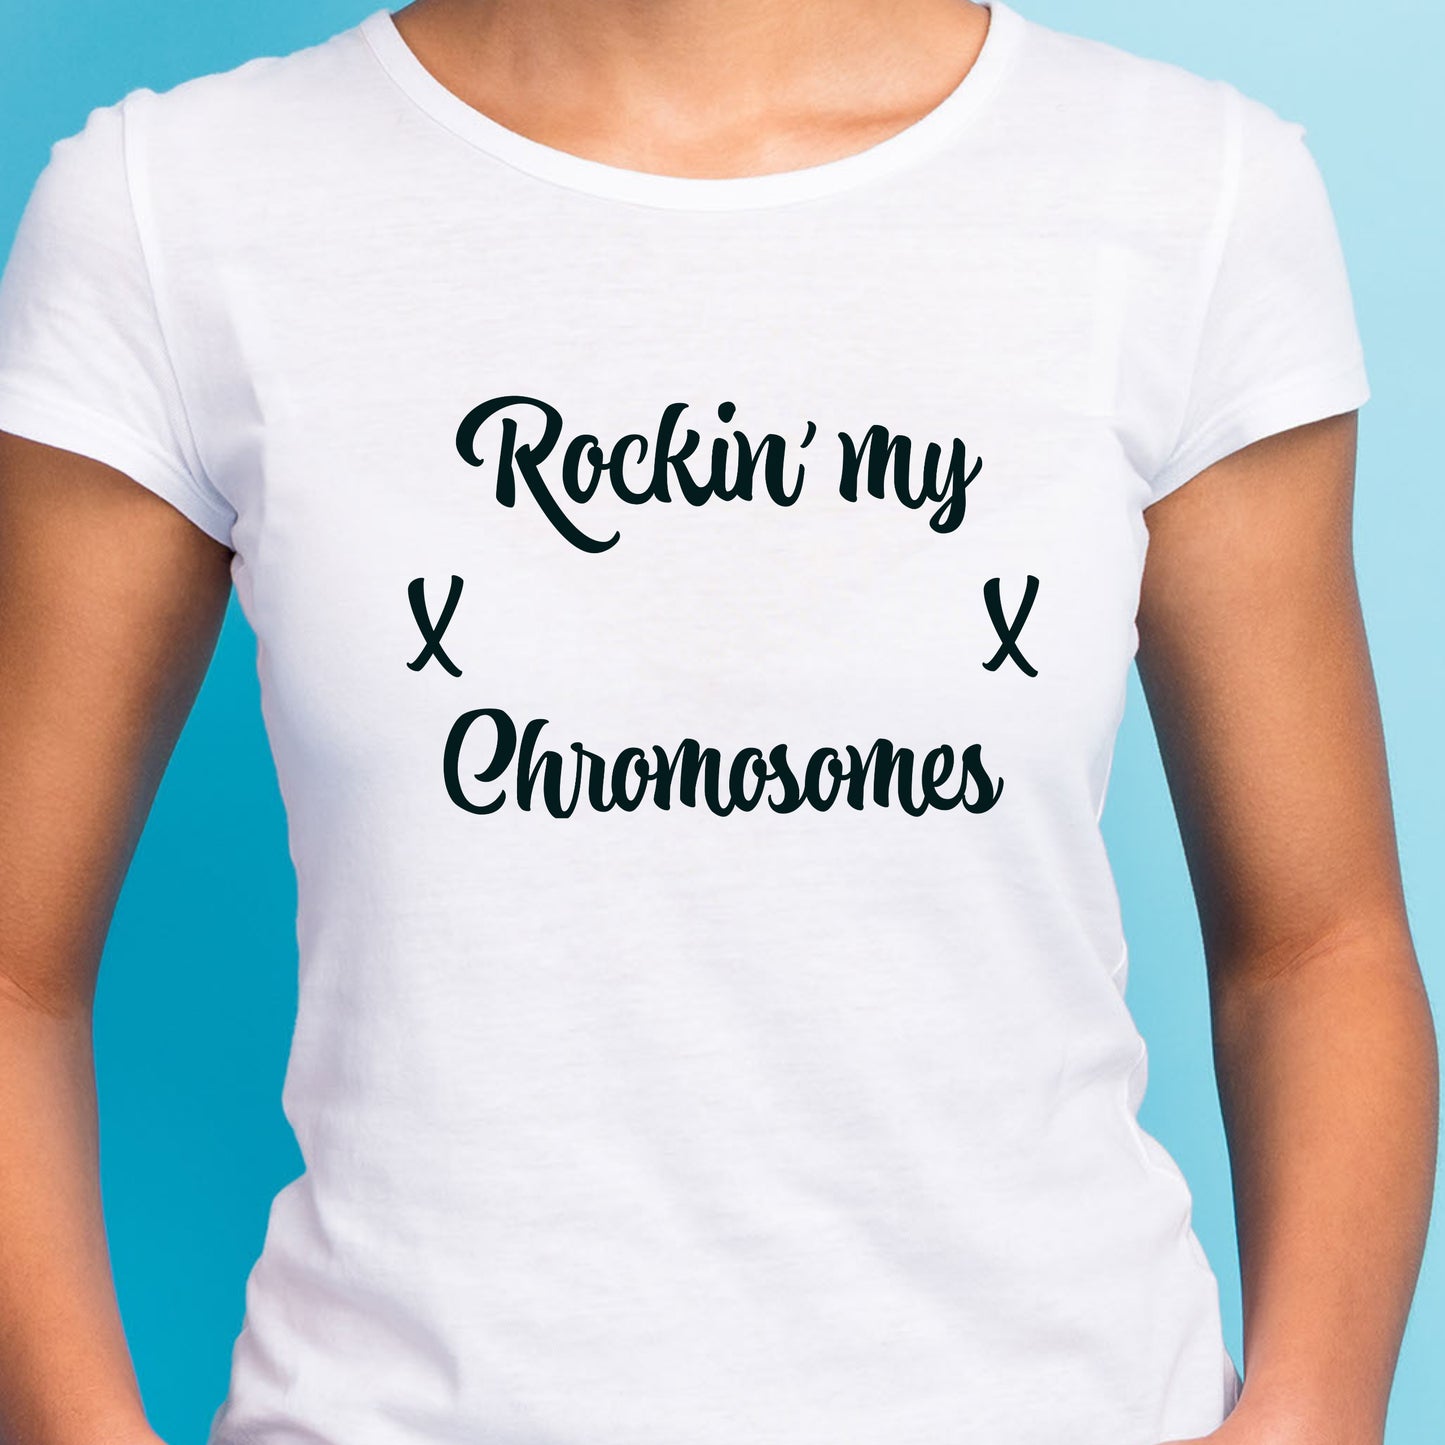 Chromosomes T-Shirt For Woman TShirt For Real Woman T Shirt For Genuine Woman Shirt For Female Gender T- Shirt For Women